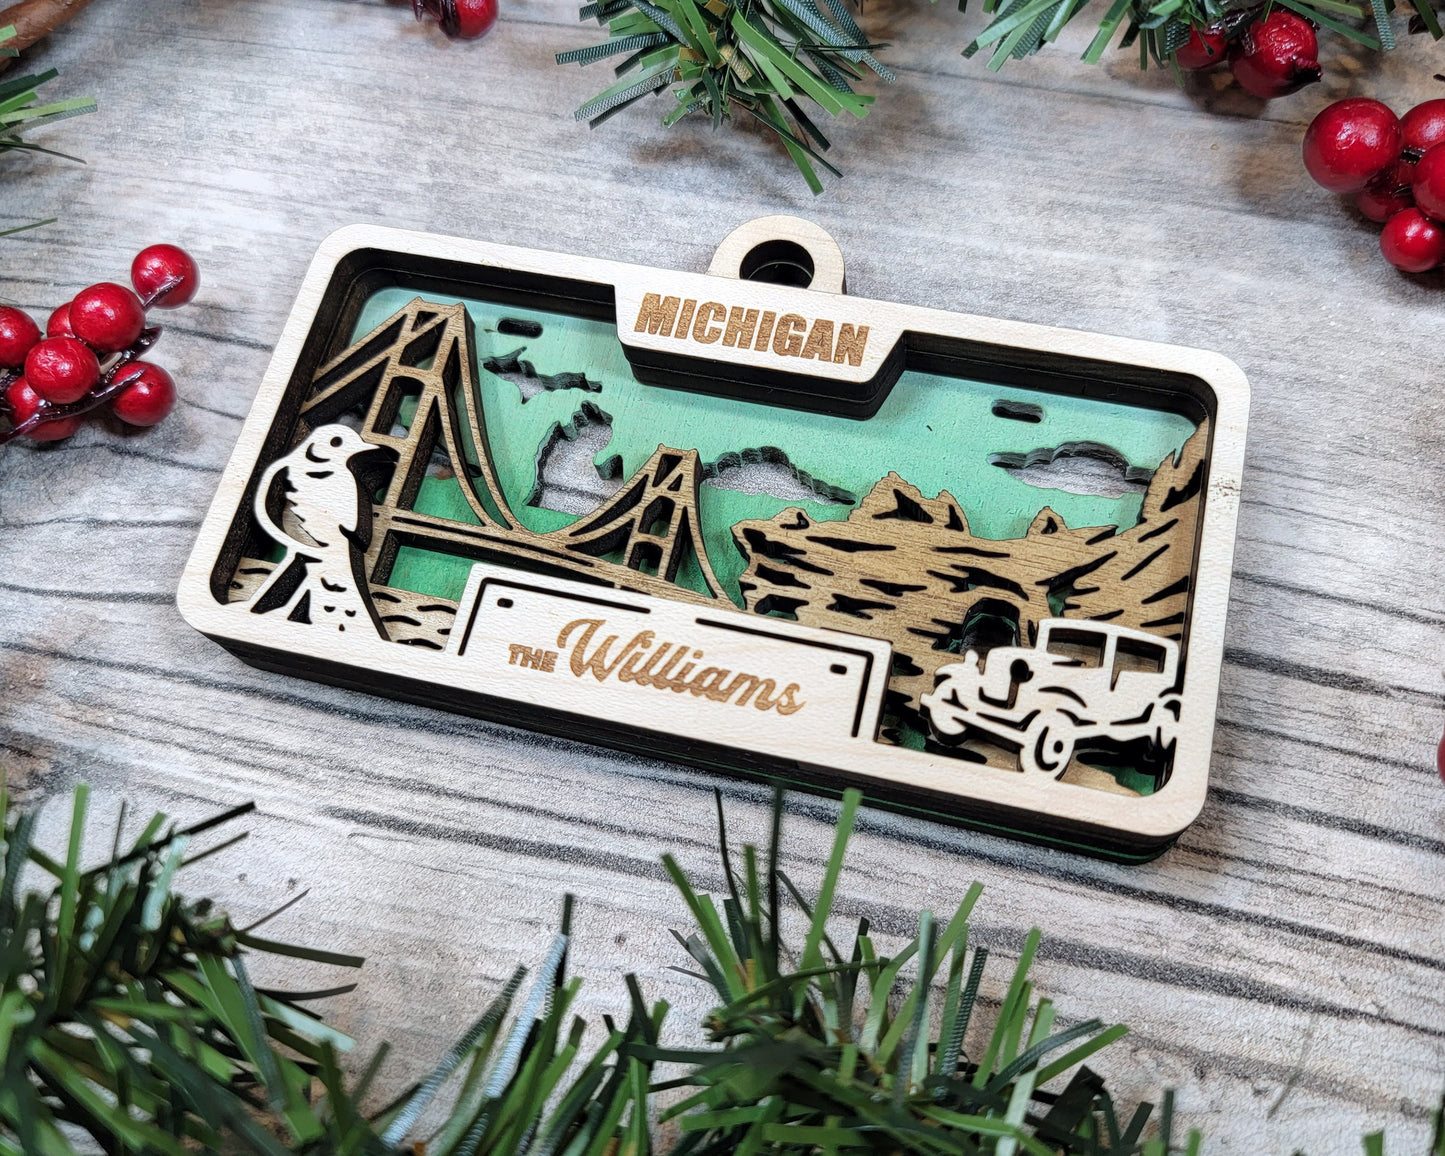 Michigan State Plate Ornament and Signage - SVG File Download - Sized for Glowforge - Laser Ready Digital Files